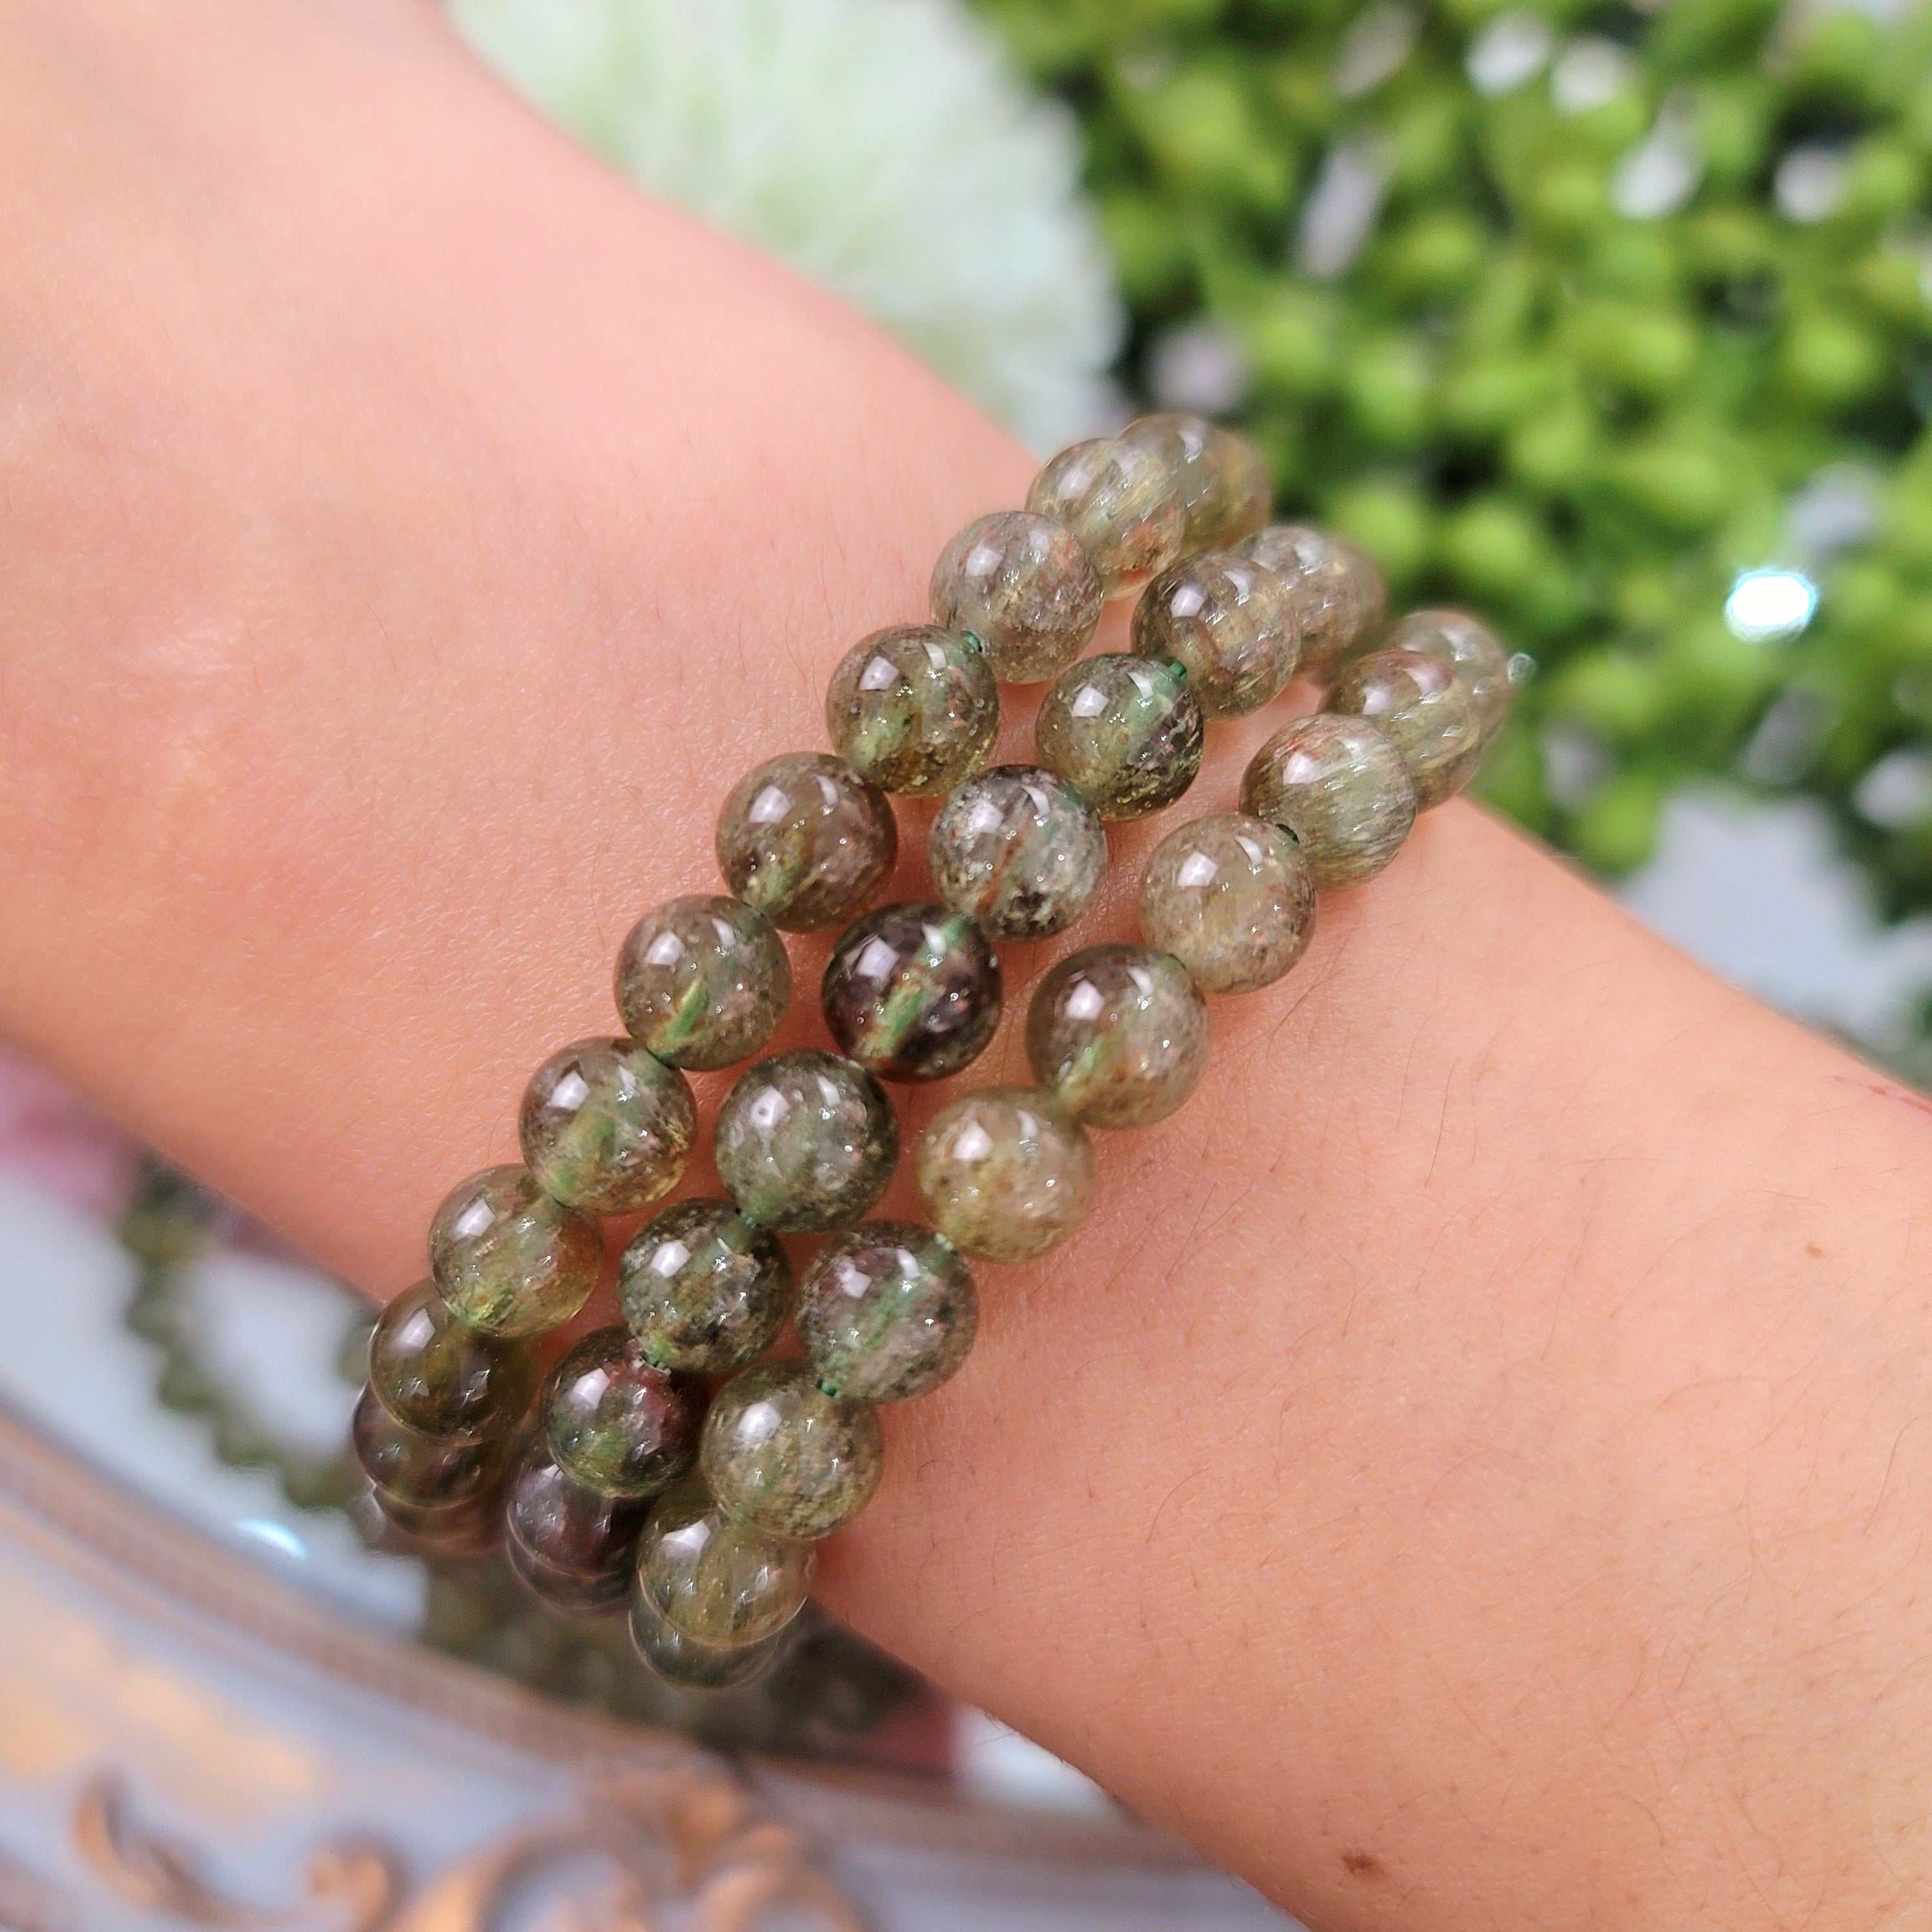 Green Apatite with Sunstone Bracelet (High Quality) for Emotional Balance, Logic and Stress Relief